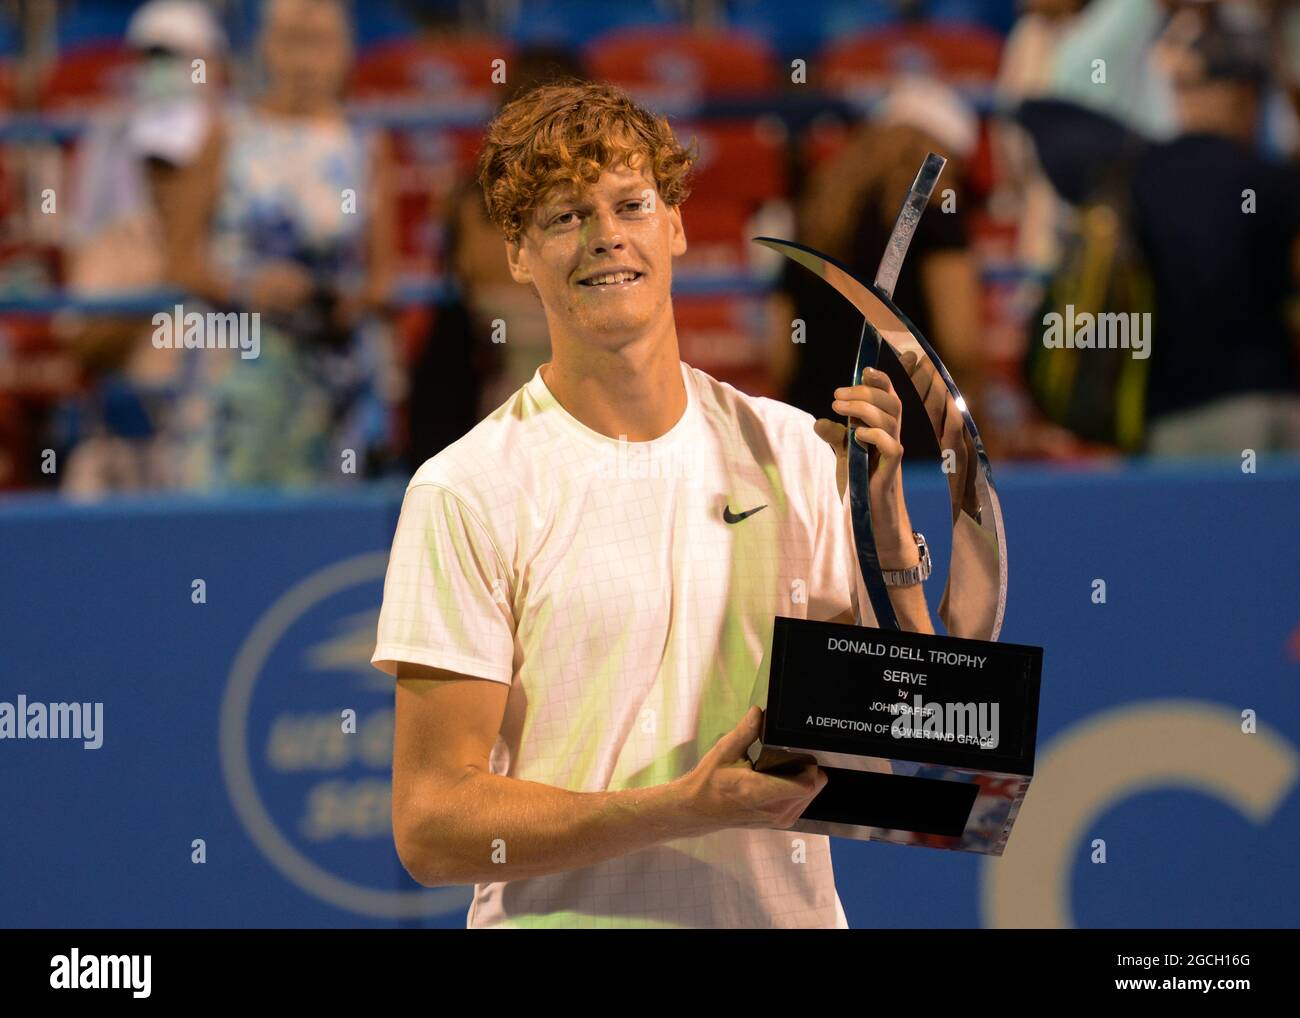 Washington, D.C, USA. 8th Aug, 2021. JANNIK SINNER of Italy with the Donald  Dell trophy after winning the Citi Open tennis tournament in Washington, DC  (Credit Image: © Christopher Levy/ZUMA Press Wire)